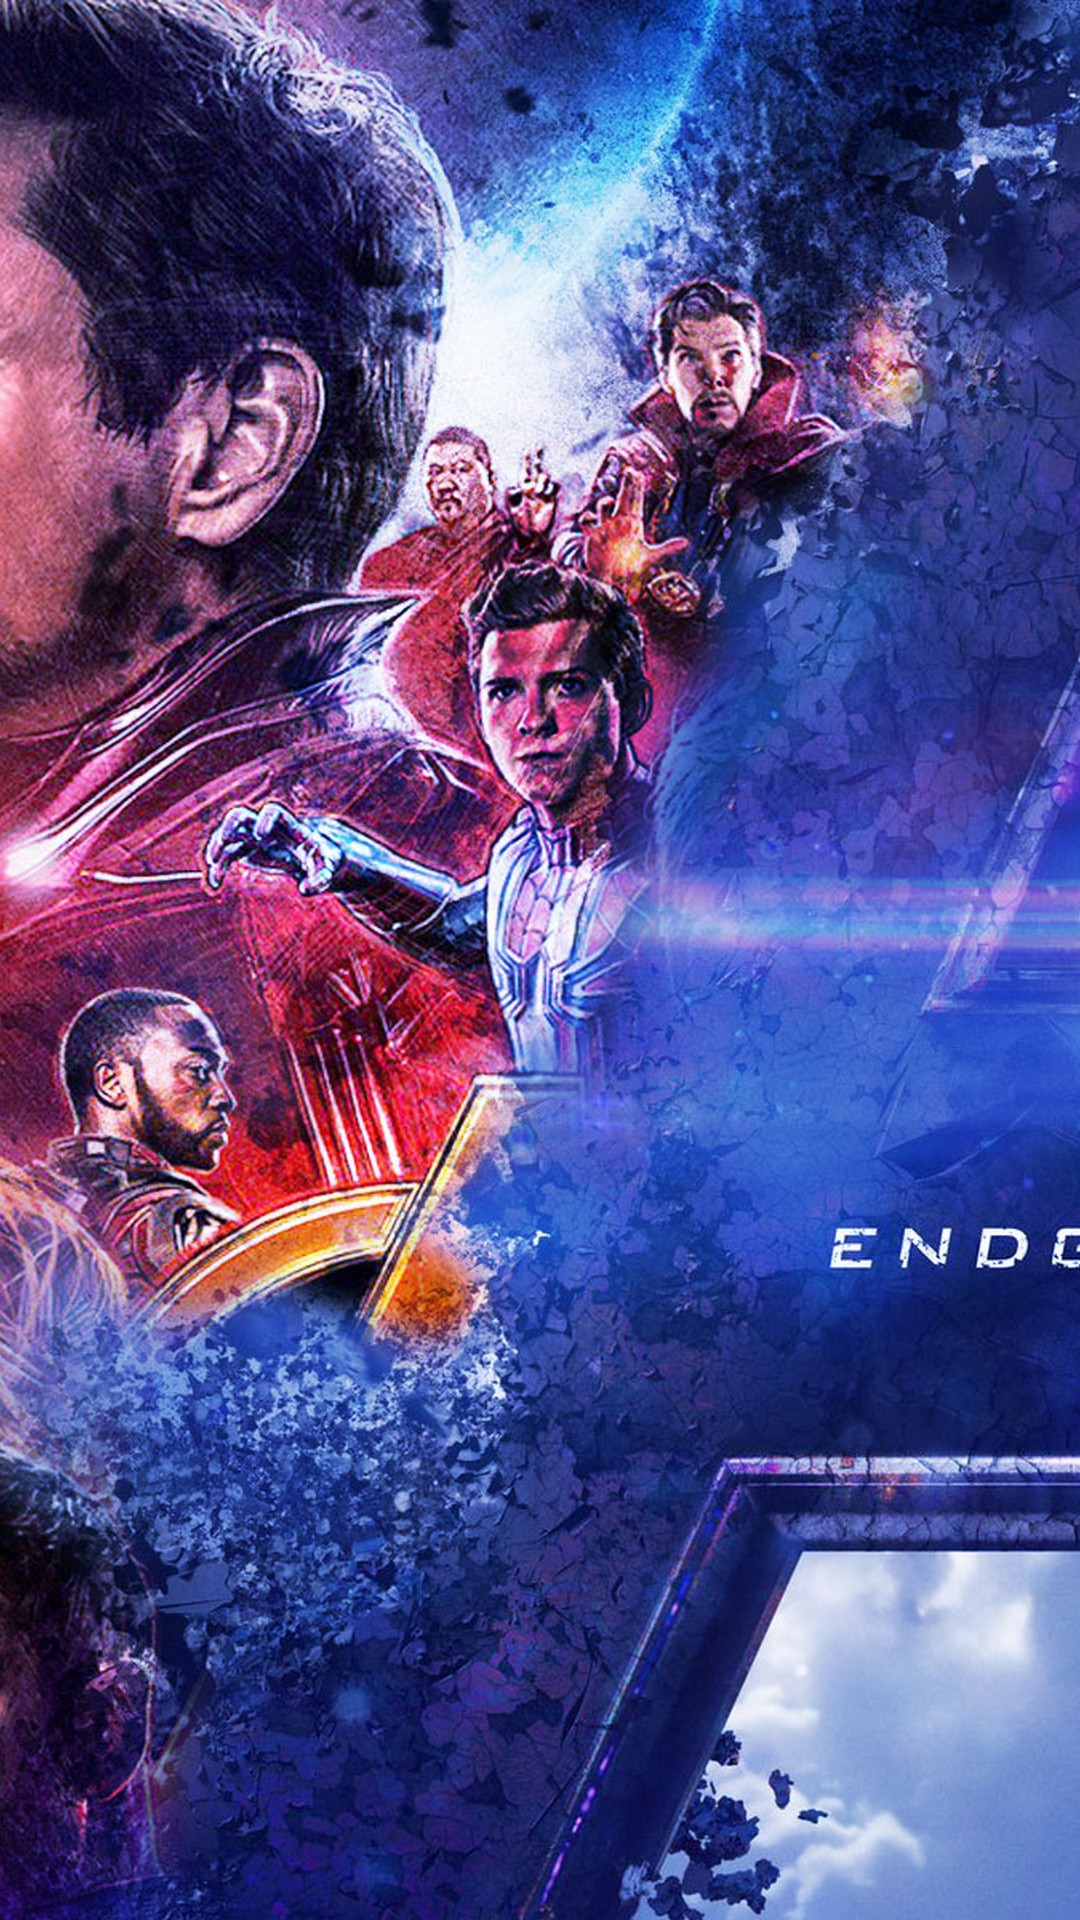 Wallpapers Phone Avengers Endgame With High-resolution - Avengers Endgame Wallpaper Hd - HD Wallpaper 